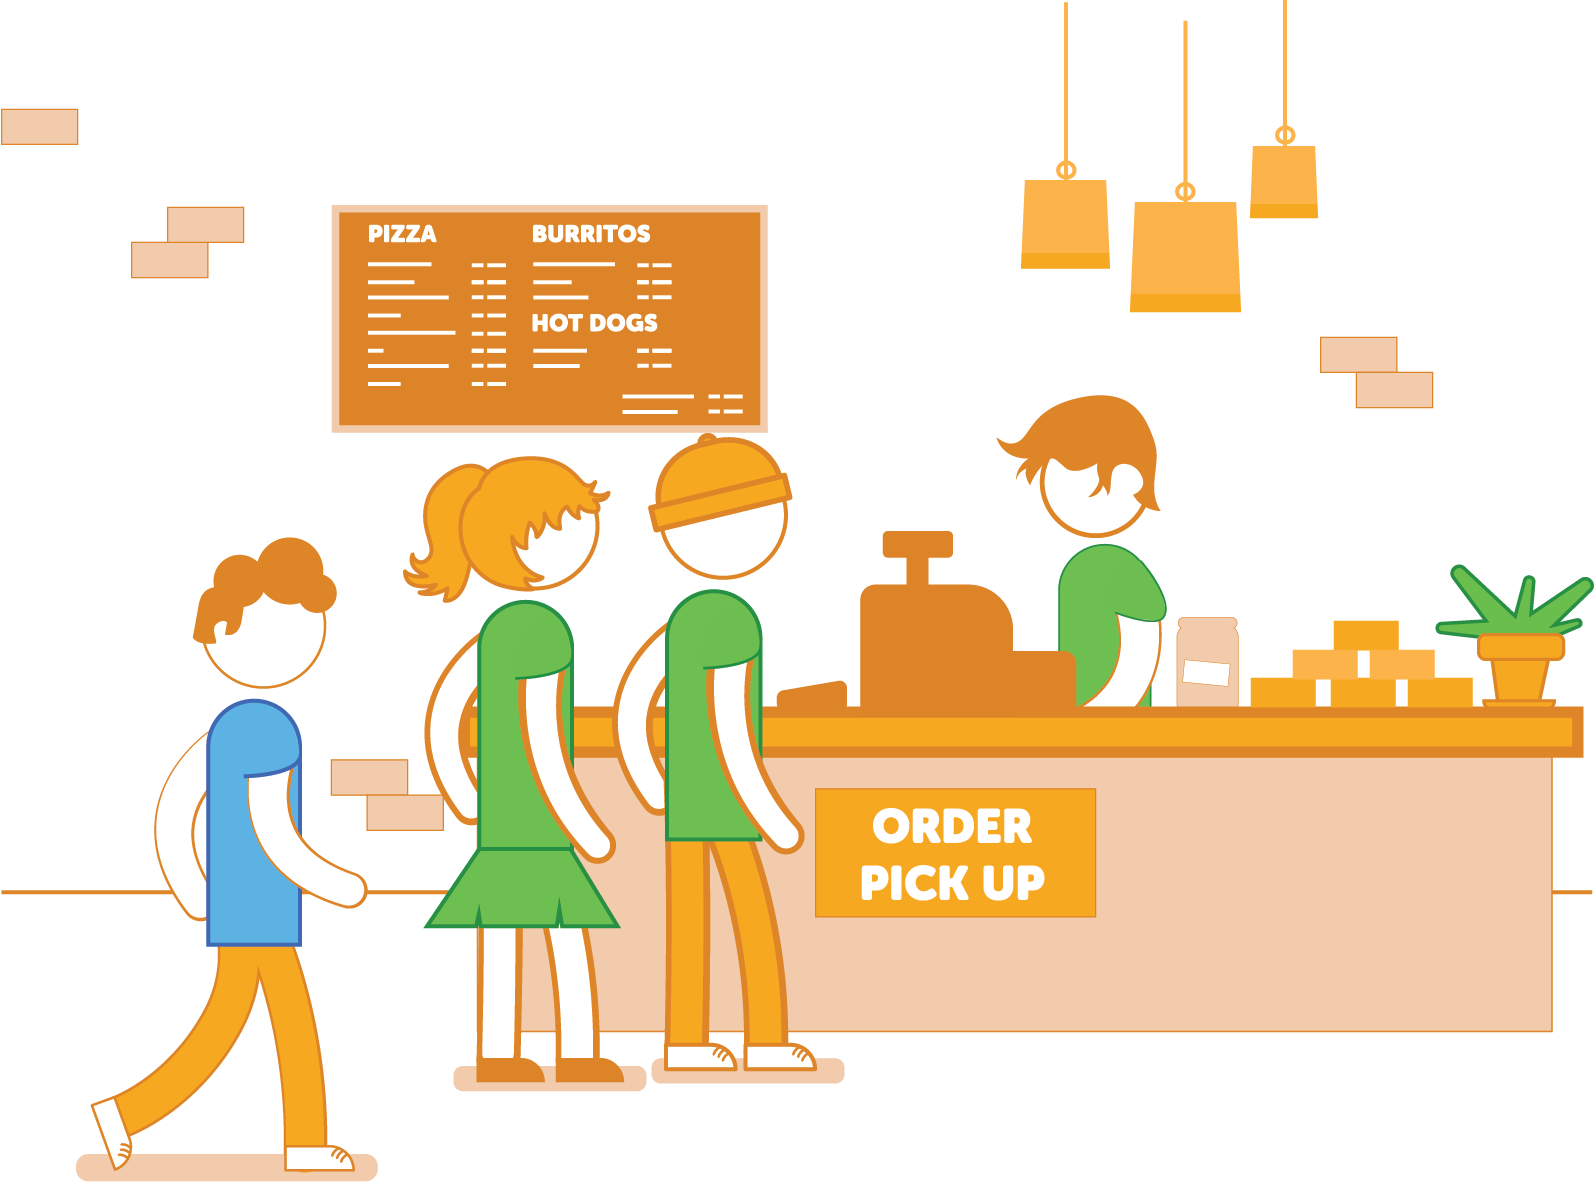 Are you ready to order. Line up Clipart. Your order. Are you ready to order cartoon PNG. Your order is ready.